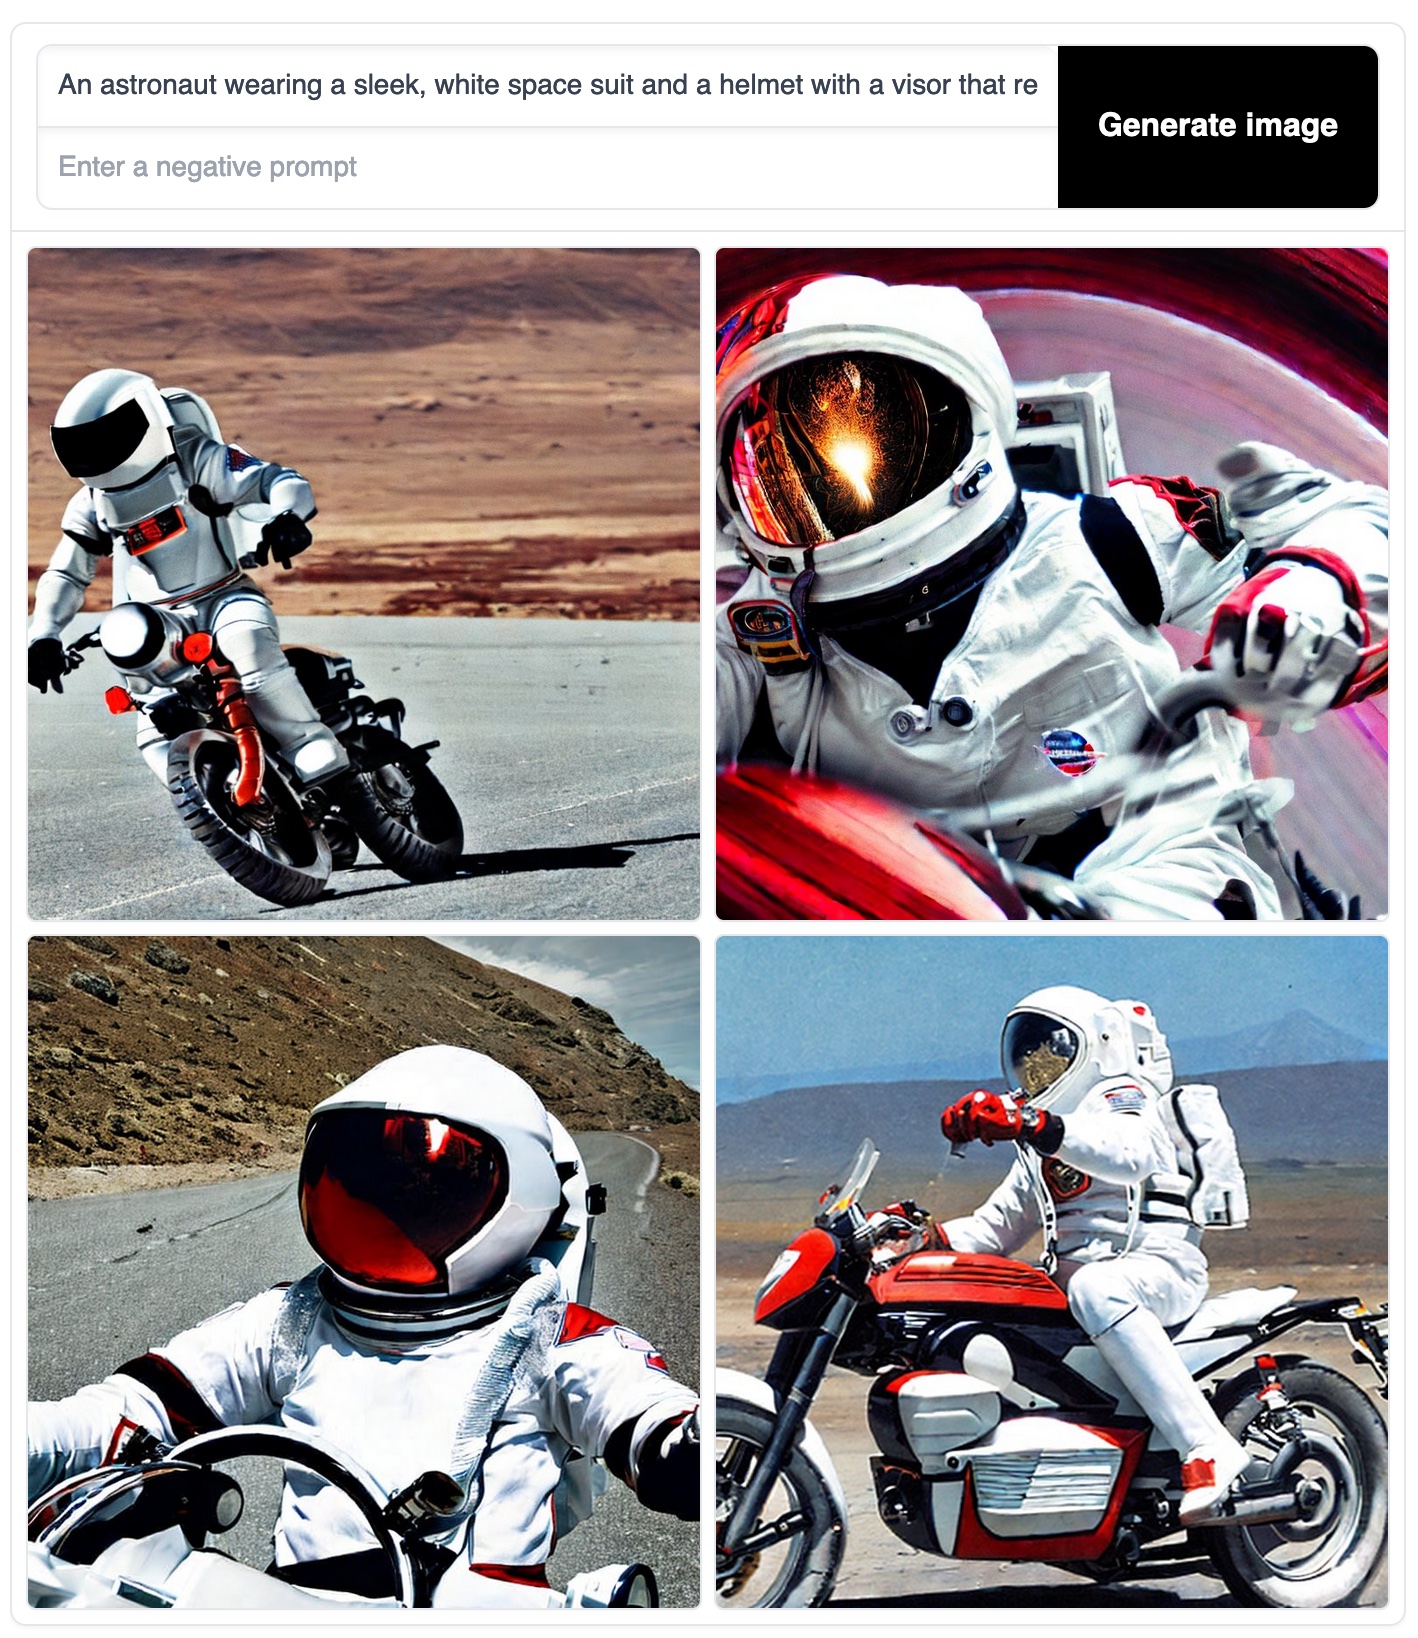 An astronaut wearing a sleek, white space suit and a helmet with a visor that reflects the surrounding landscape as they zoom past on a motorcycle with gleaming silver pipes and a red and black paint job